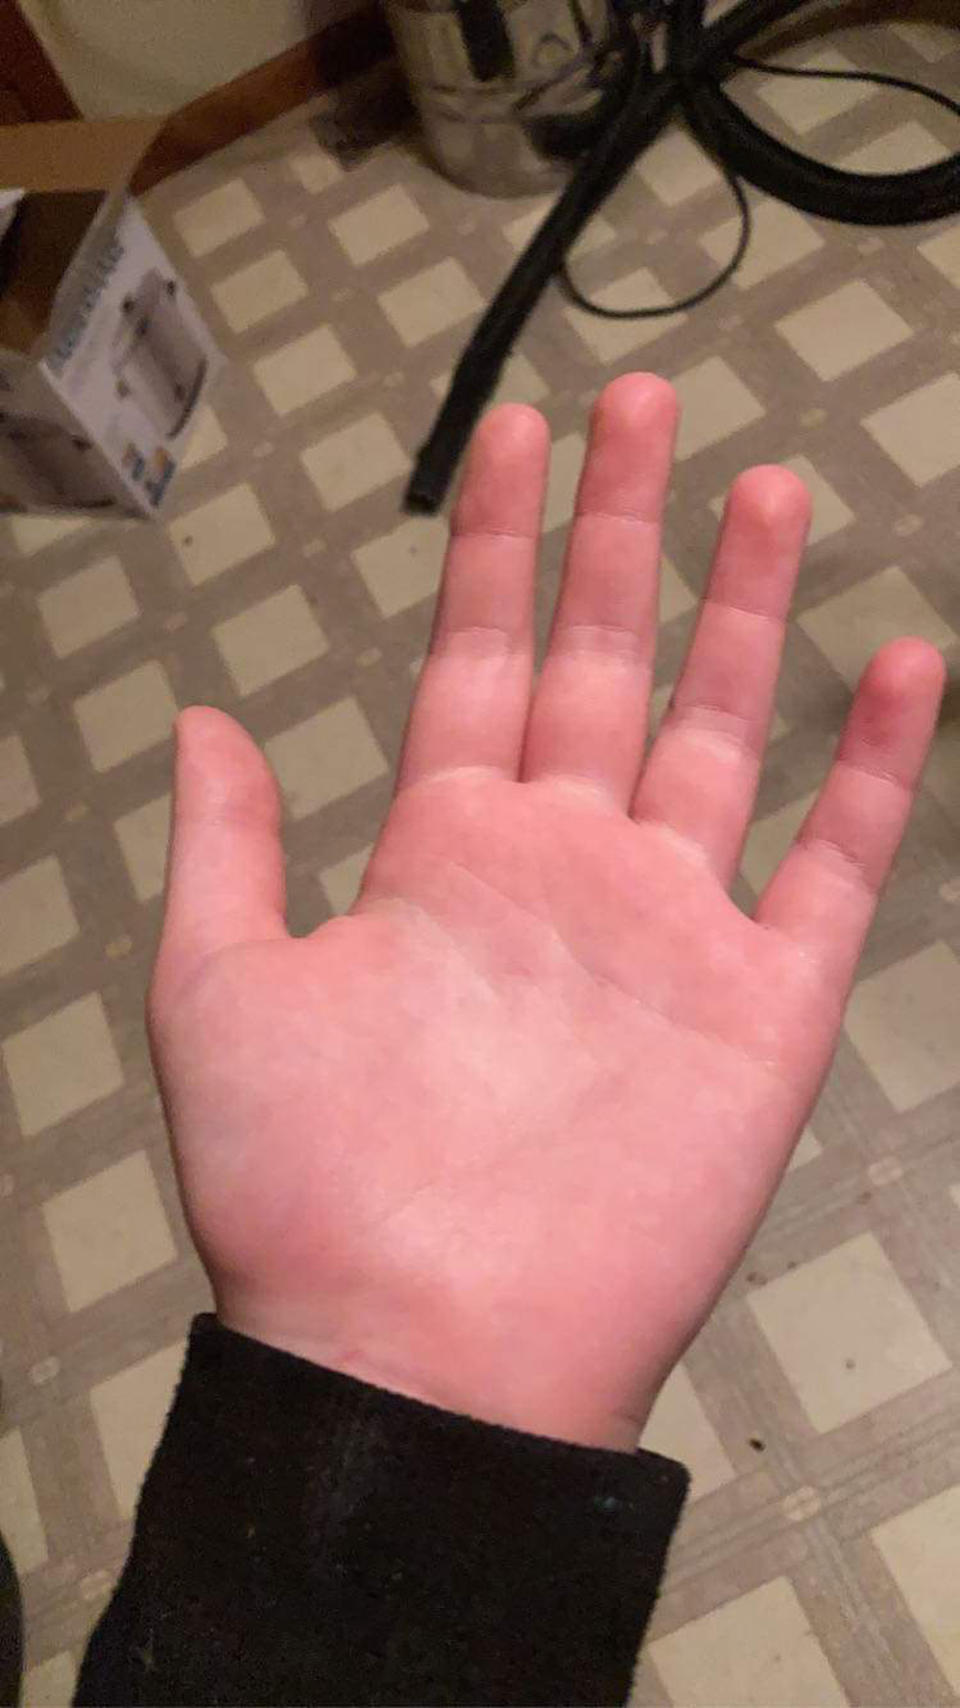 What her hand looks like after a shower (Collect/PA Real Life)